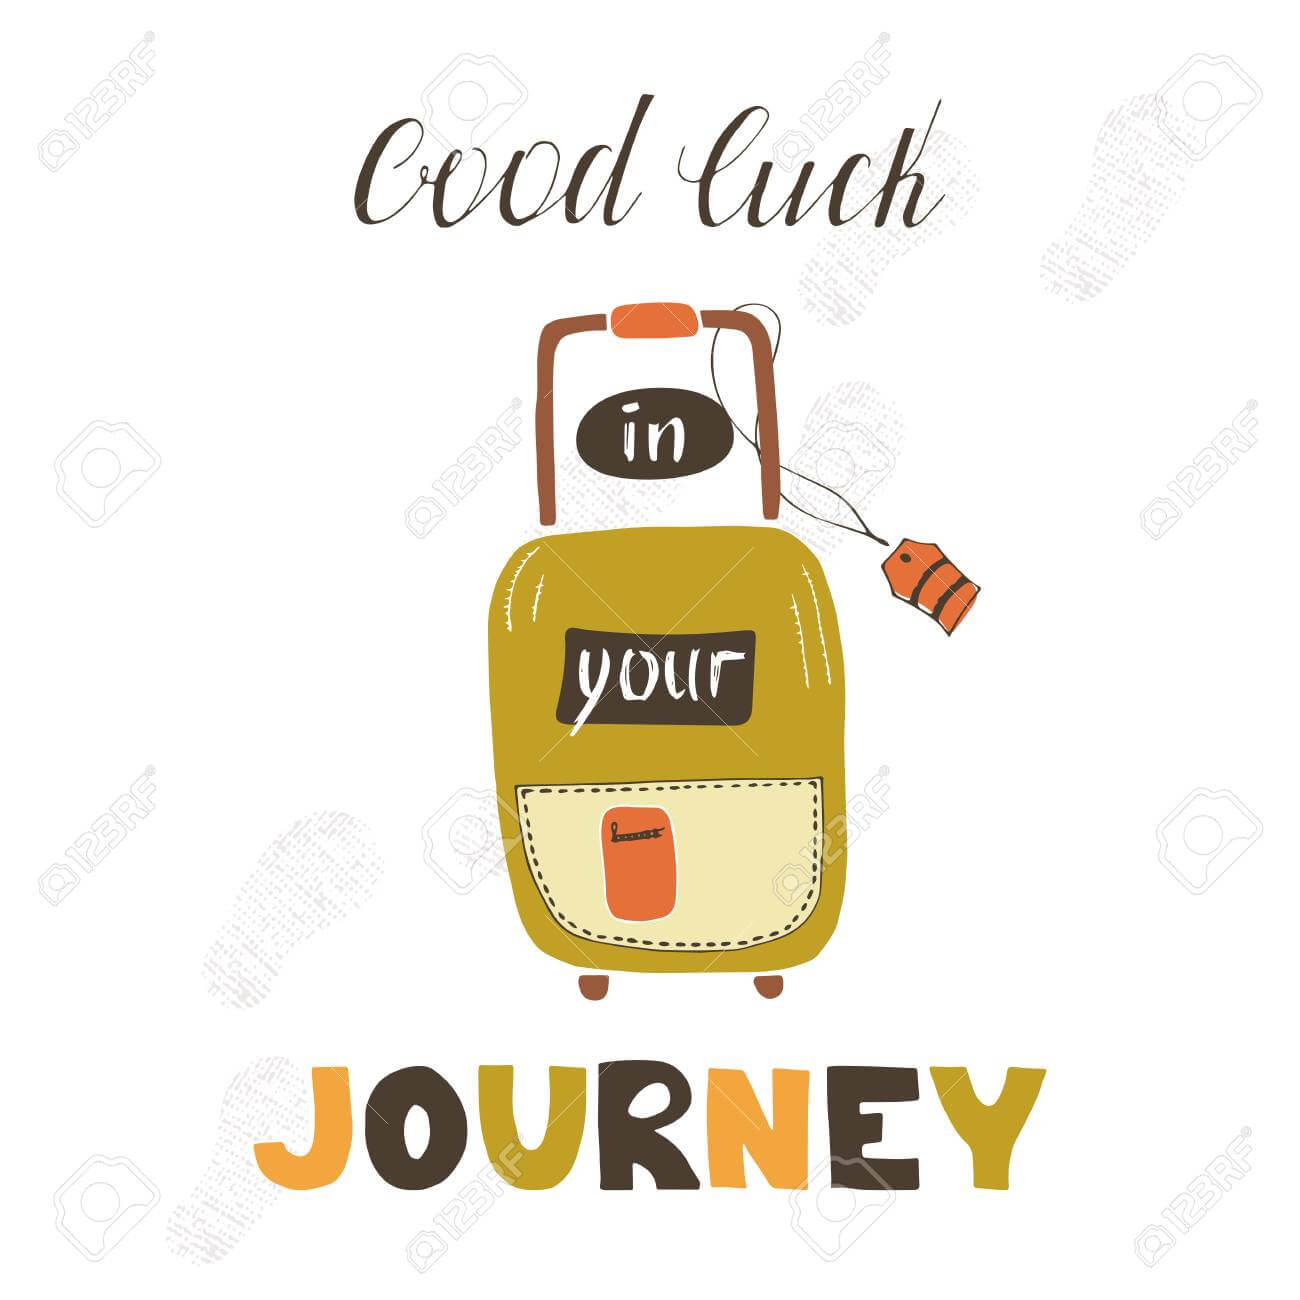 Travel Card Template With Suitcase. Greeting Postcard With Hand.. With Good Luck Card Templates